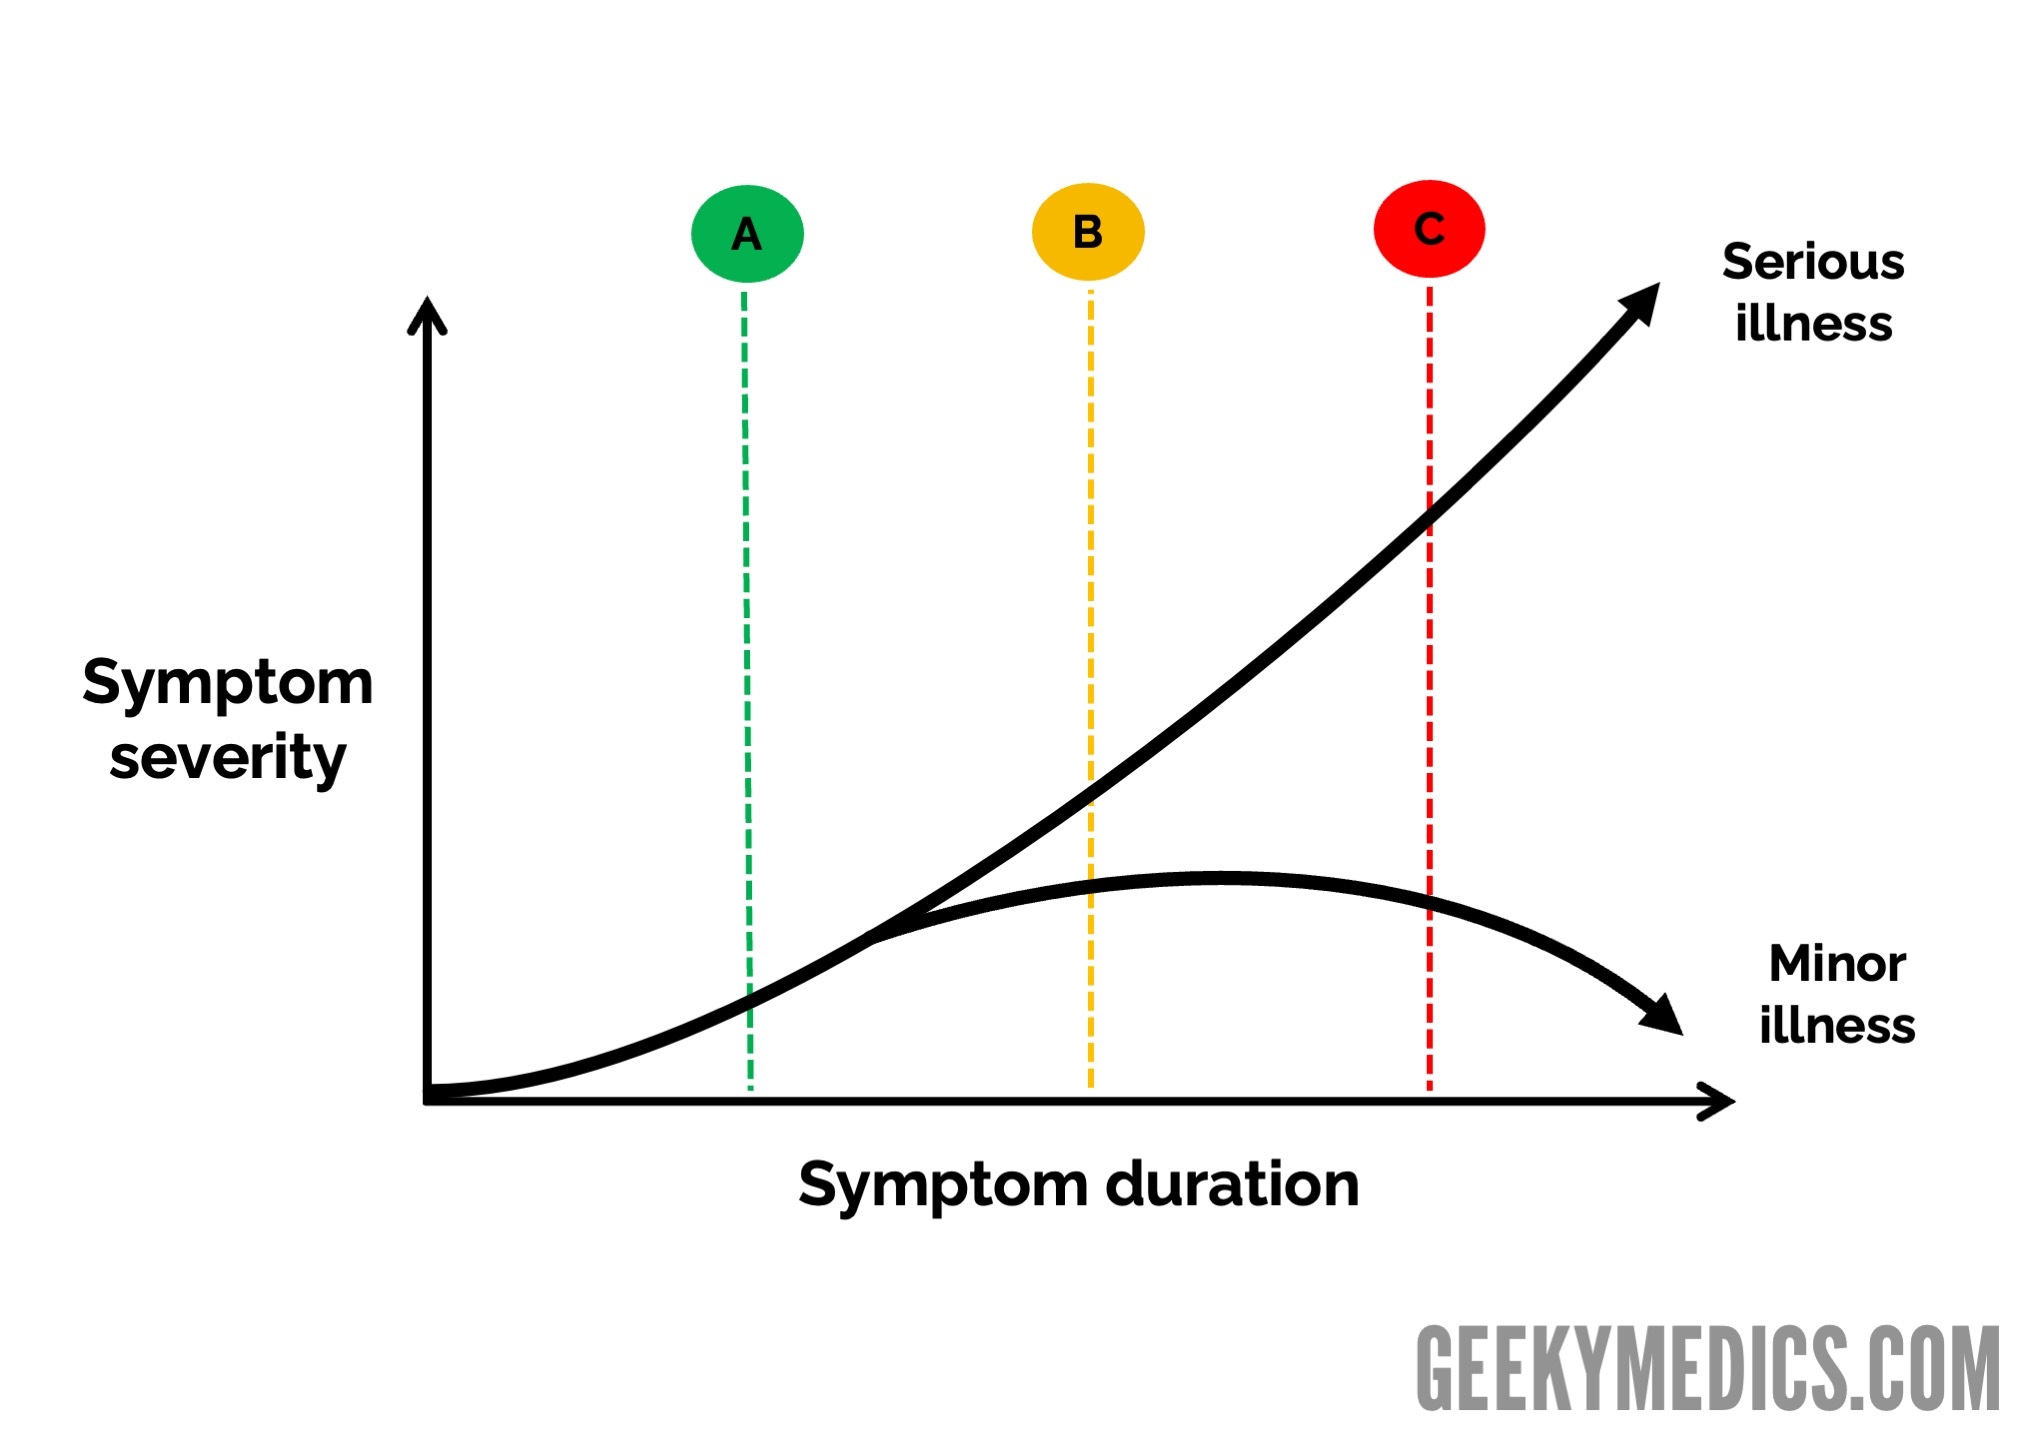 A graph showing illness is a dynamic process and symptoms evolve over time